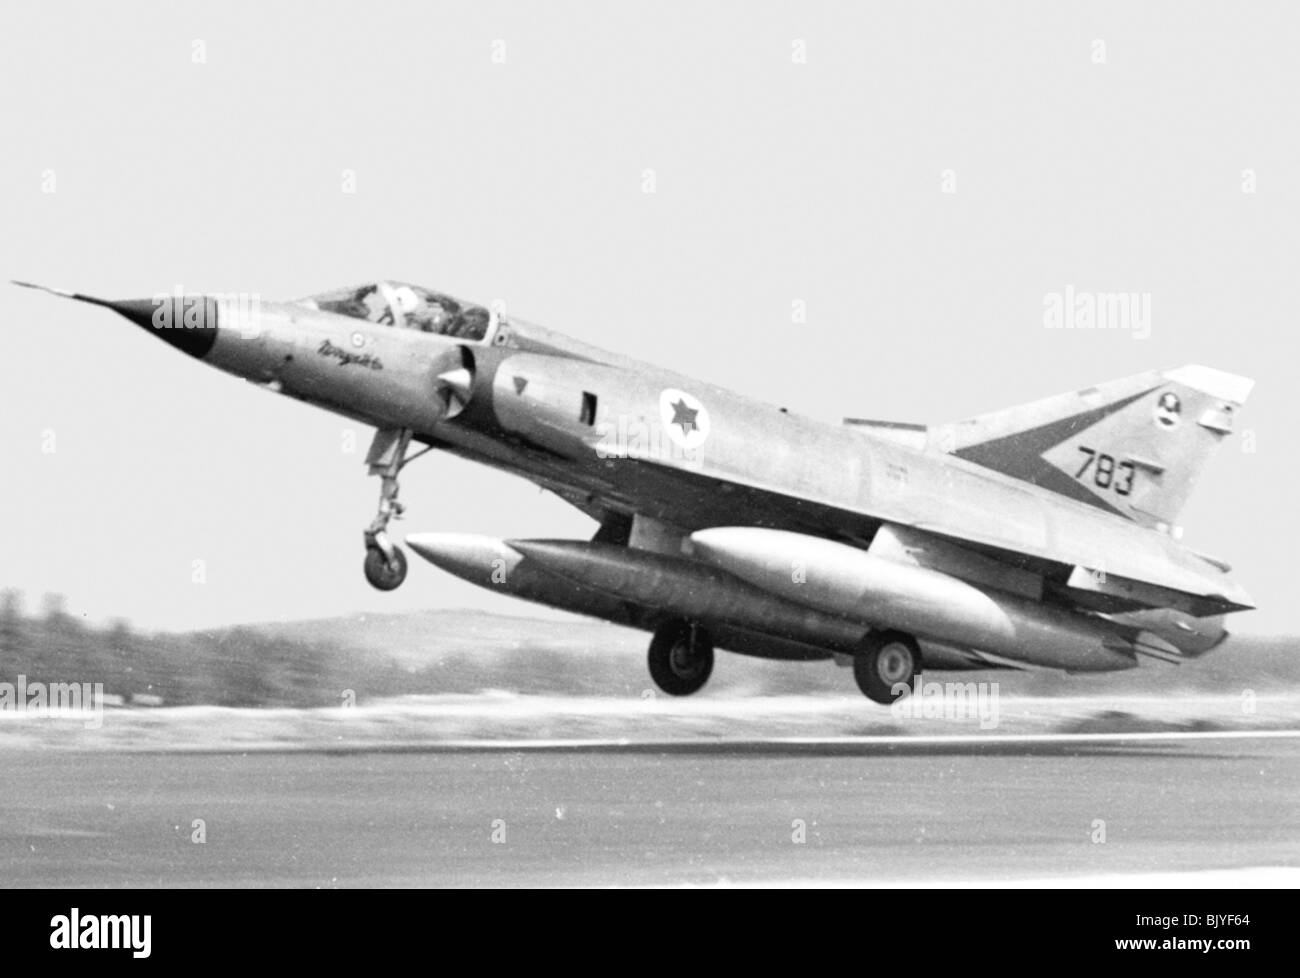 Israeli Air Force Dassault Mirage IIICJ fighter plane at takeoff - Archival  Black and white Image Stock Photo - Alamy